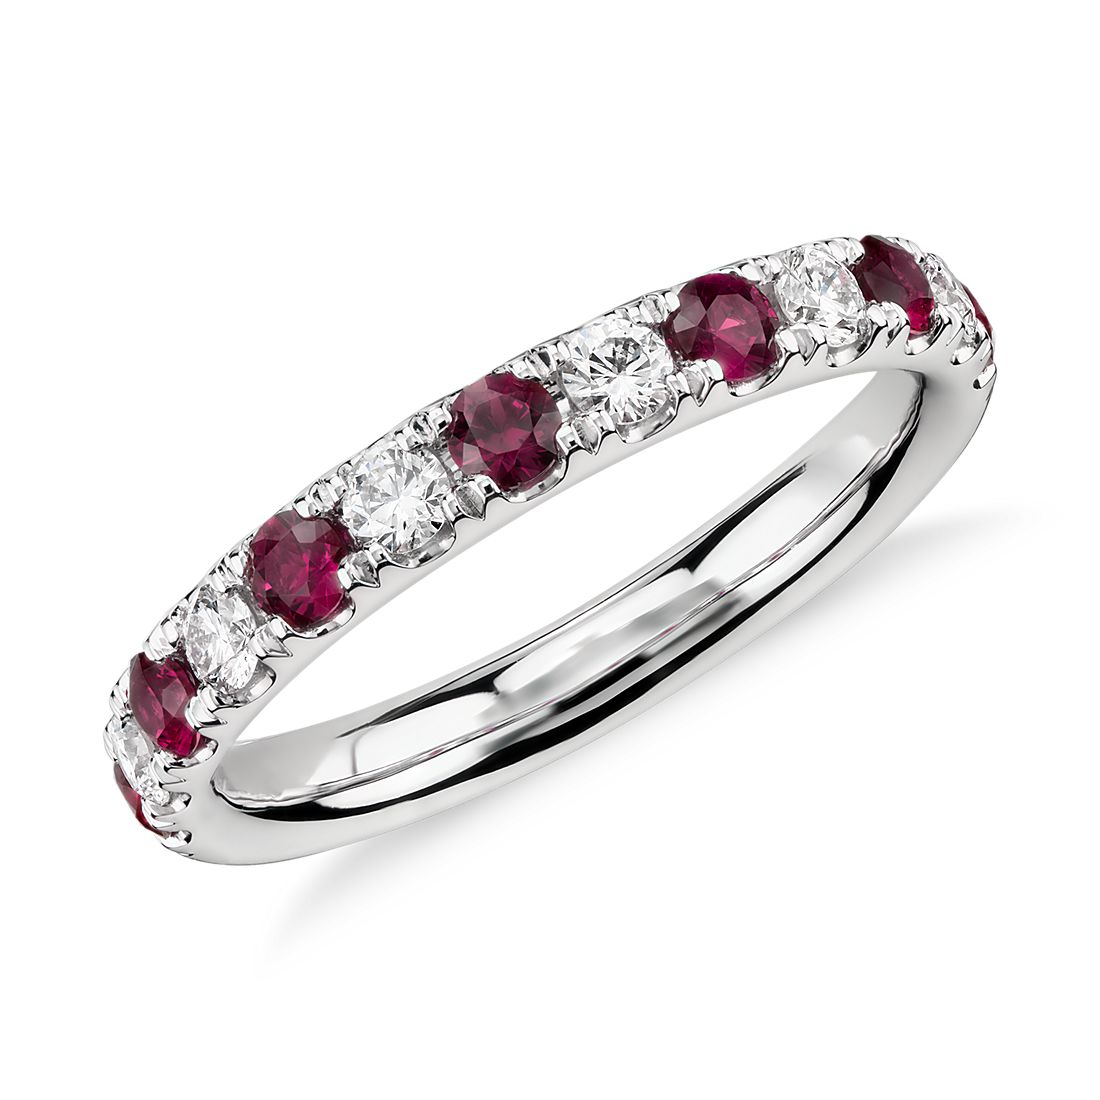 Riviera Pave Ruby and Diamond Ring in Platinum (2.2mm)